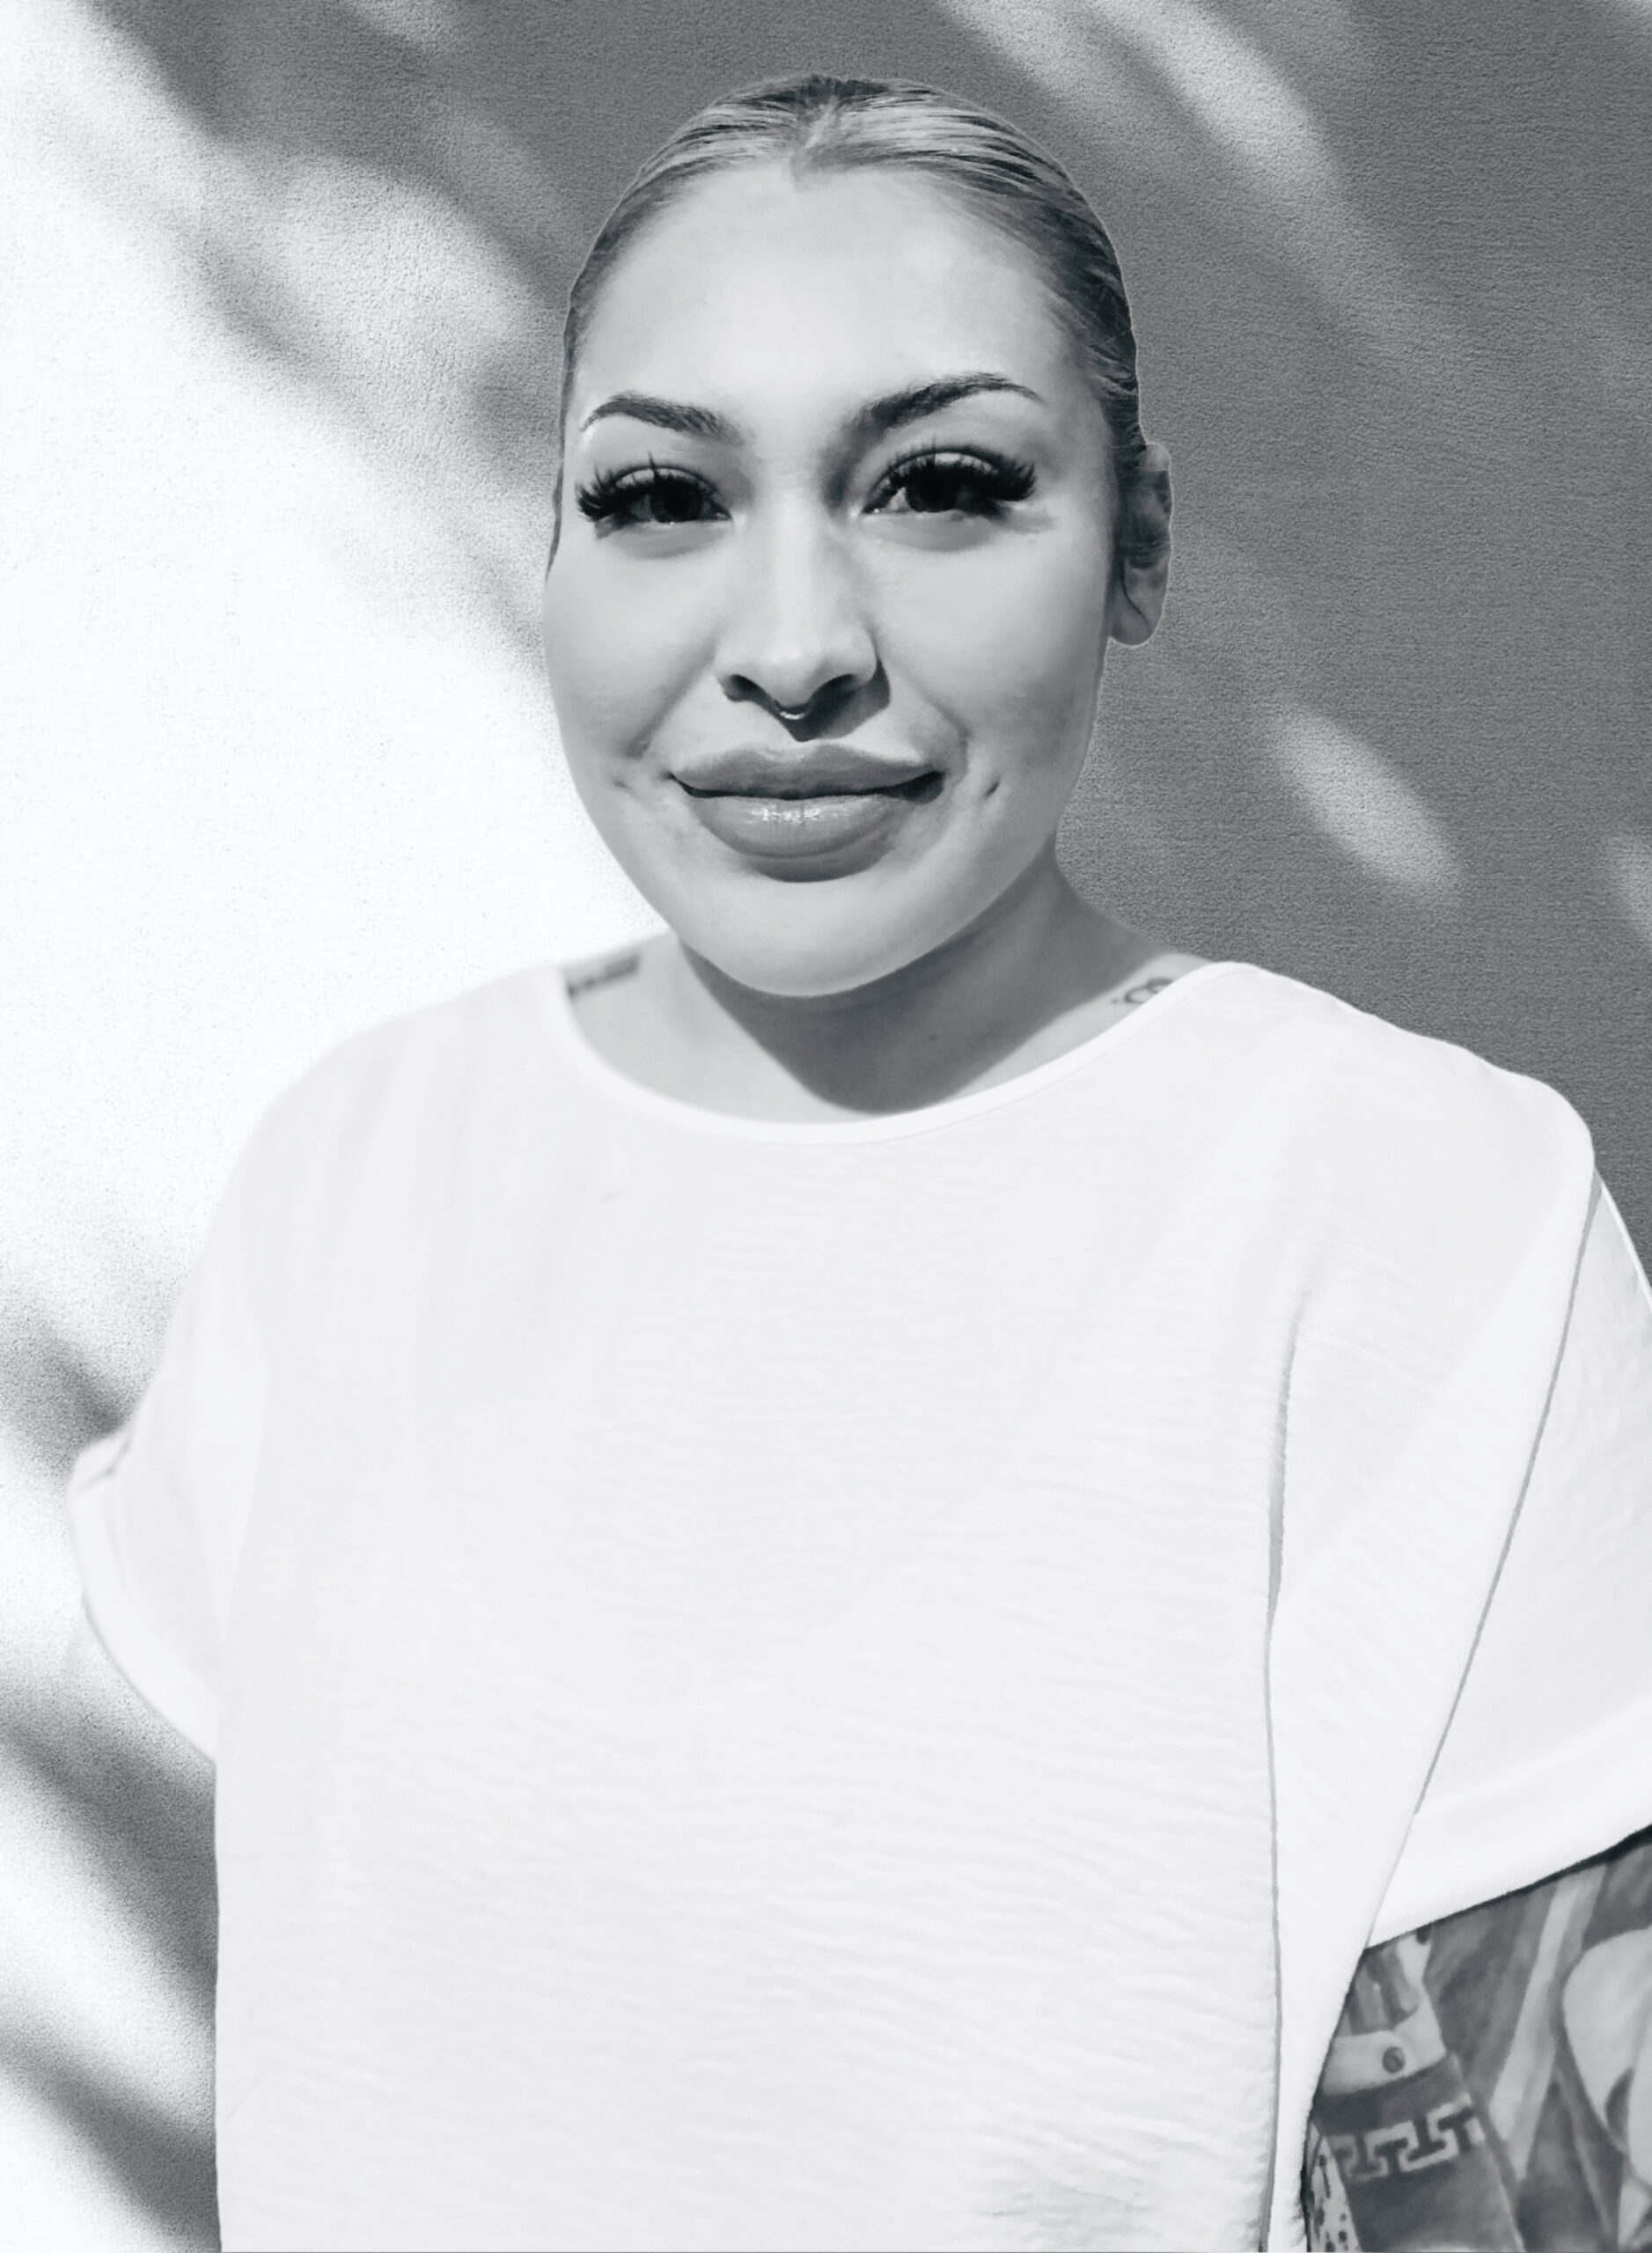 This black and white photo features Paola, a twenty something Hispanic woman. She is wearing a white t-shirt, has her bleached hair pulled up into a bun hidden behind her head and has a visible sleeve tattoo on her left arm. She has long, full lashes, full lips and dimpled cheeks. She is standing at a slight angle and looking at the camera with a closed mouth smile. She is in front of a while textured background with dappled sunlight on it.